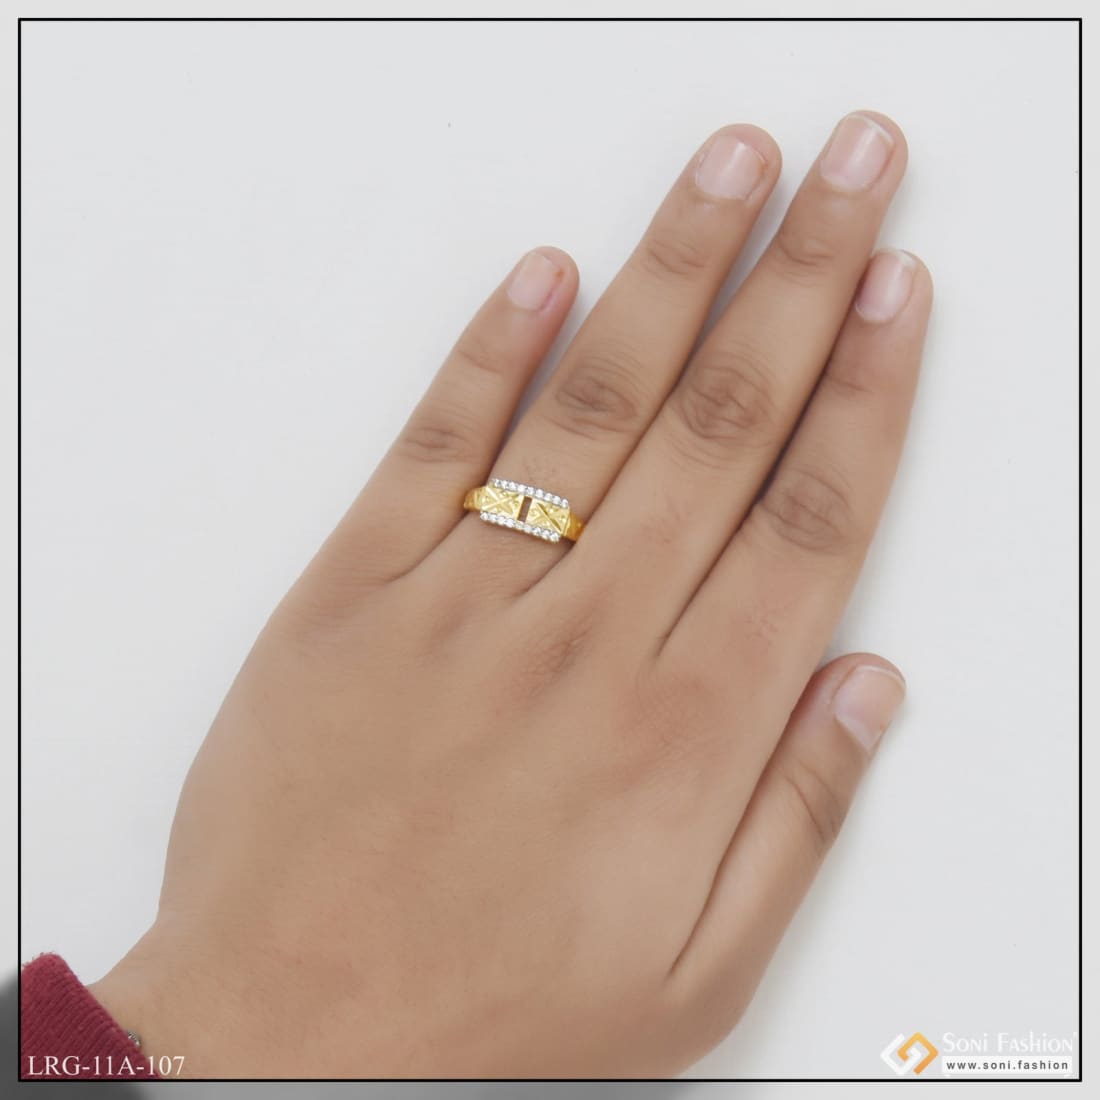 Buy WHP Yellow Gold Ring For Men, 22KT (916) BIS Hallmark Pure Gold, Gold  Jewellery, Mens Fashion Accessories, Simple Ring For Men, Suitable For  Gifting, GRGD23005943 at Amazon.in